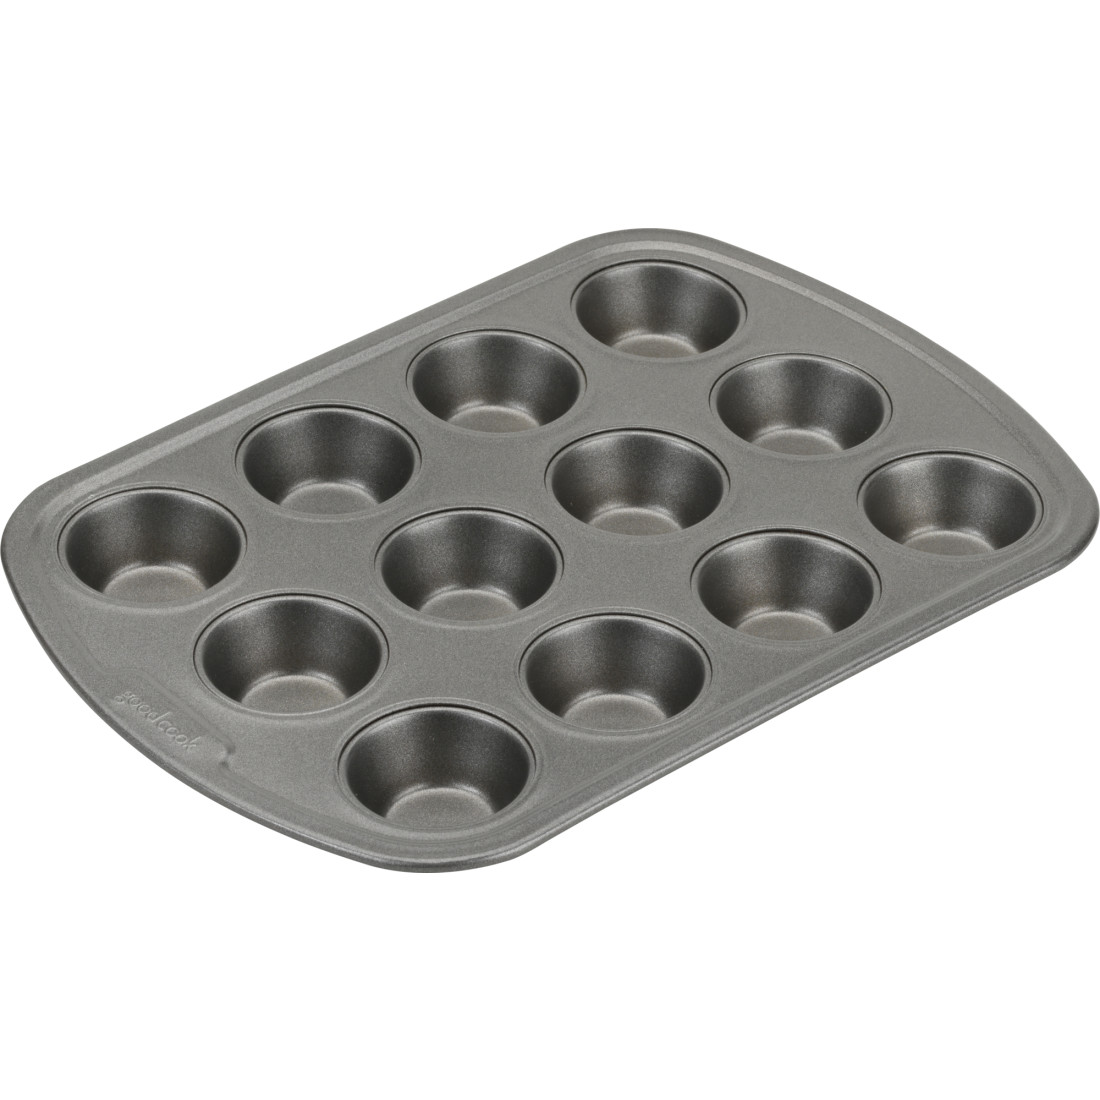 12 Cup Muffin Pan, Non-Stick Baking Pans, Easy to Clean Making Jumbo Muffins  Cup